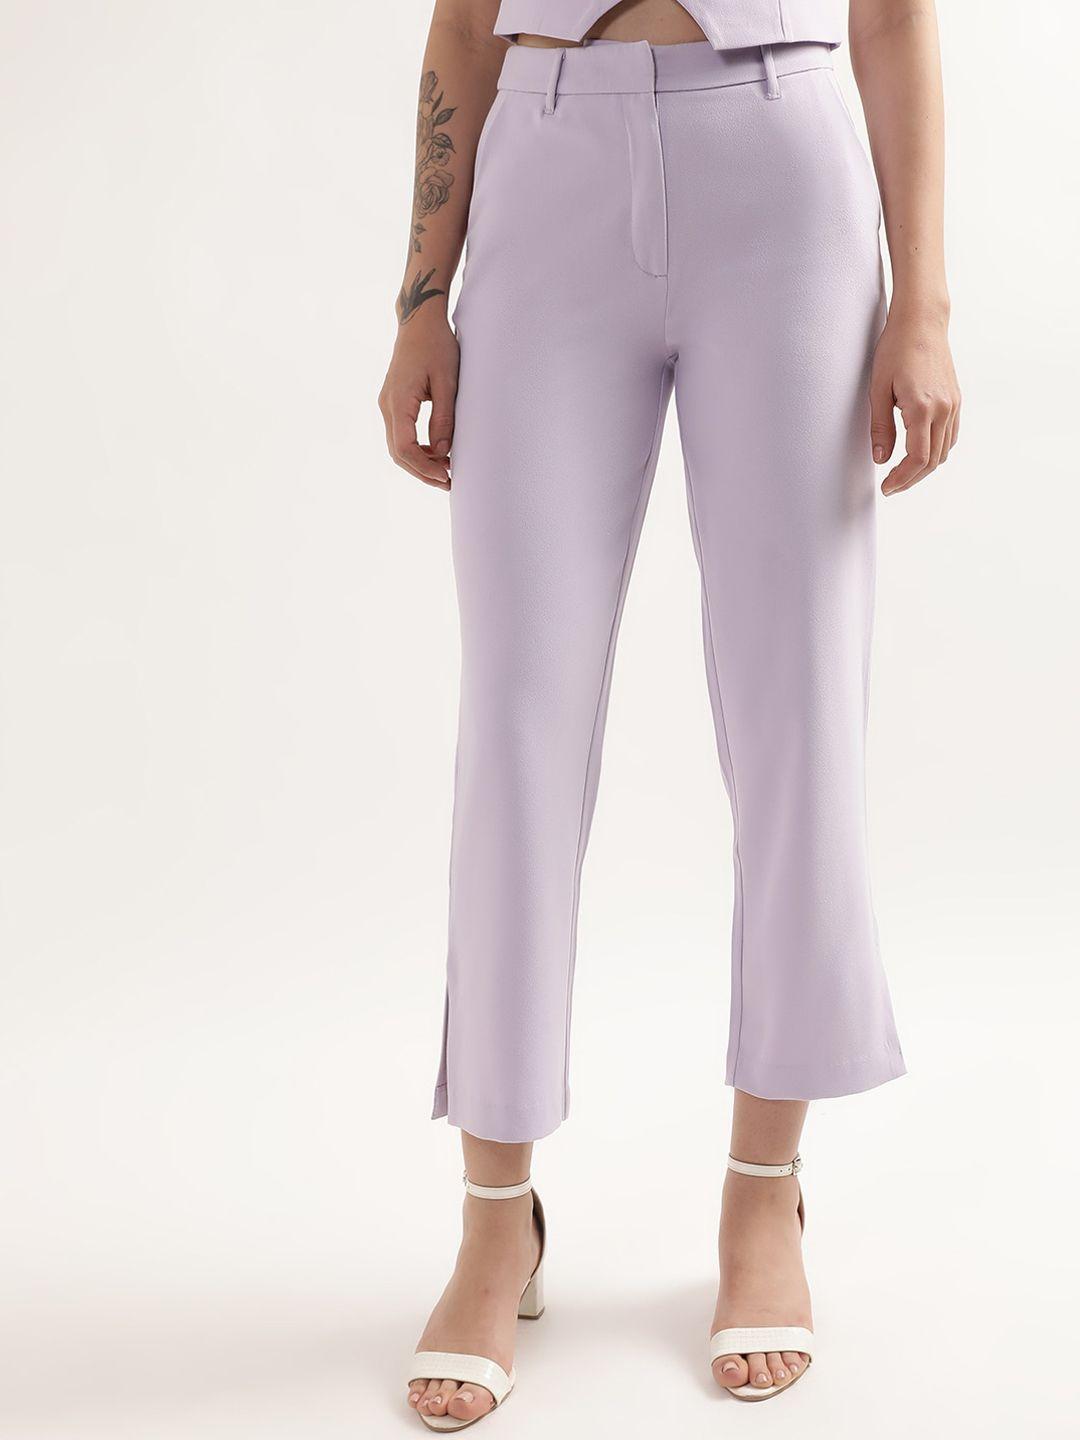 centrestage women high-rise culottes trousers